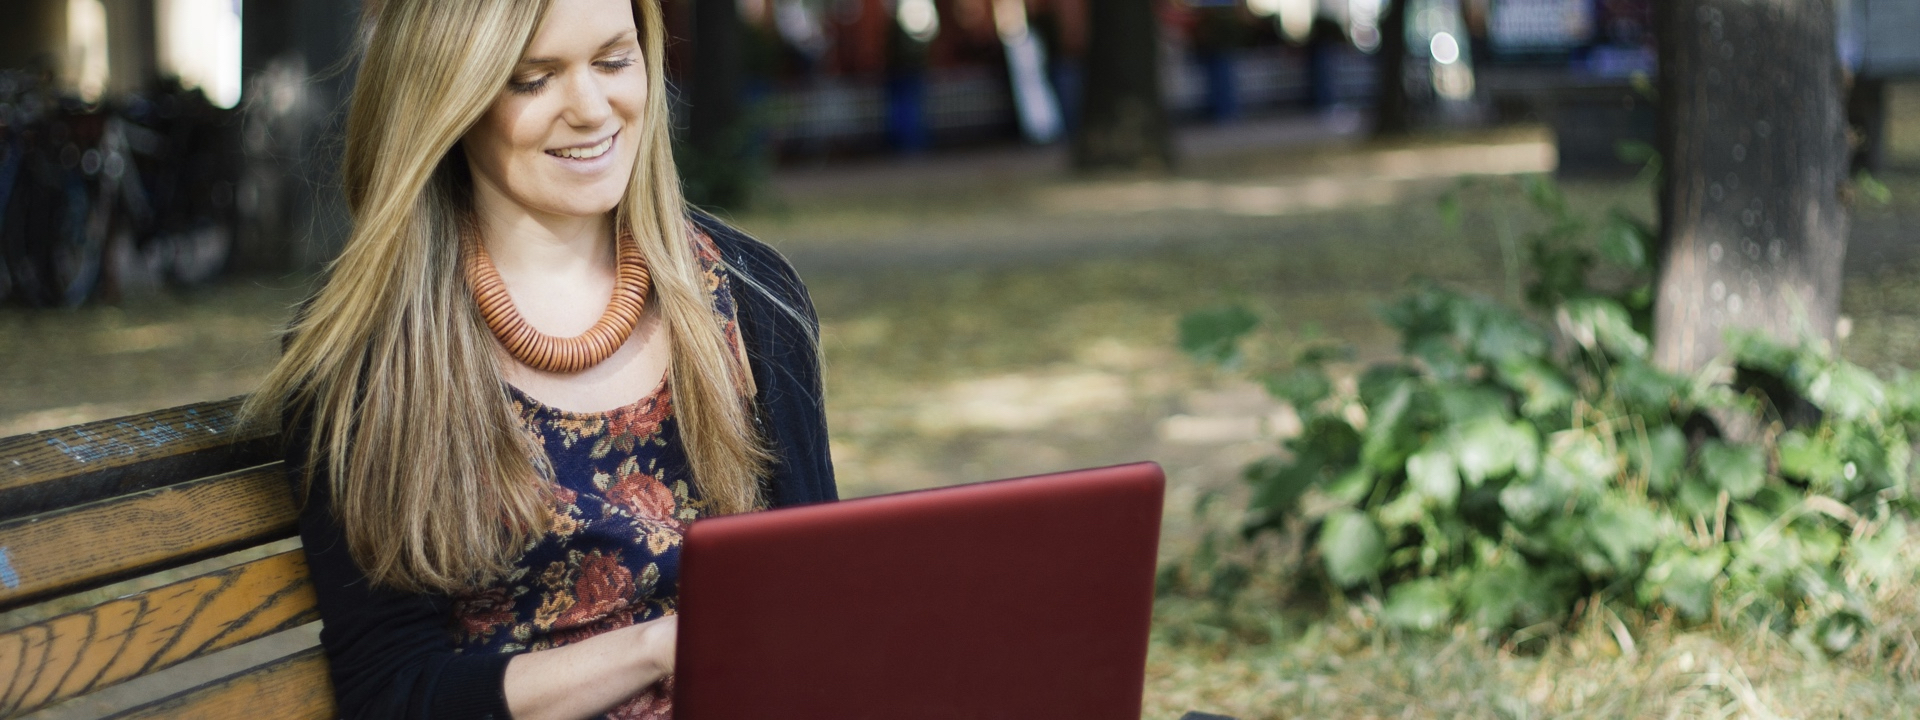 Young blonde woman in a park bench with a red laptop computer